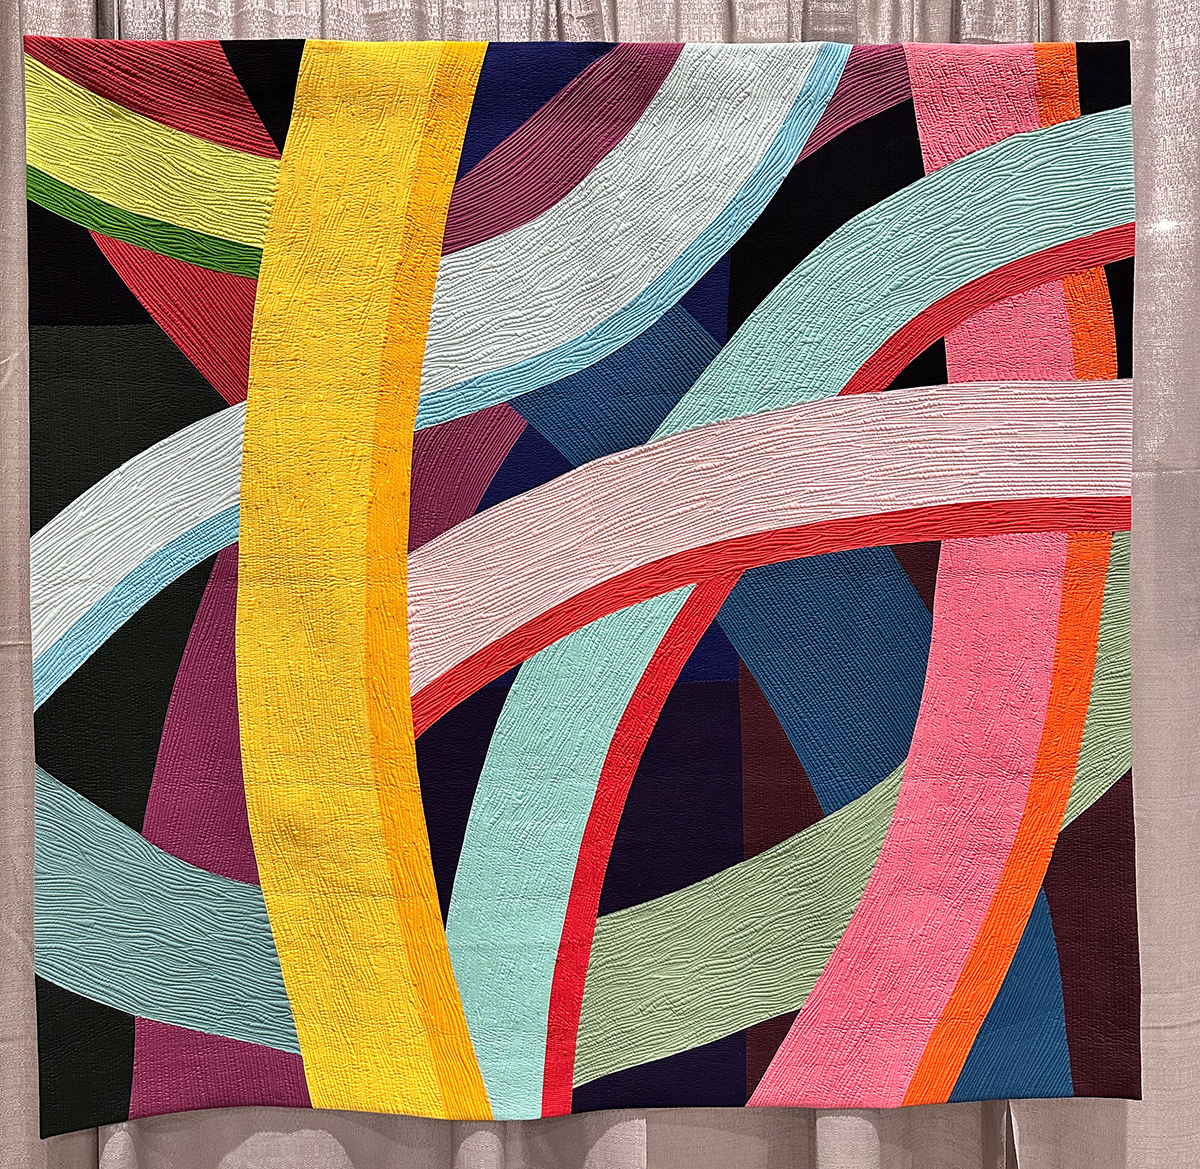 detail of colorful quilt with large gentle curves